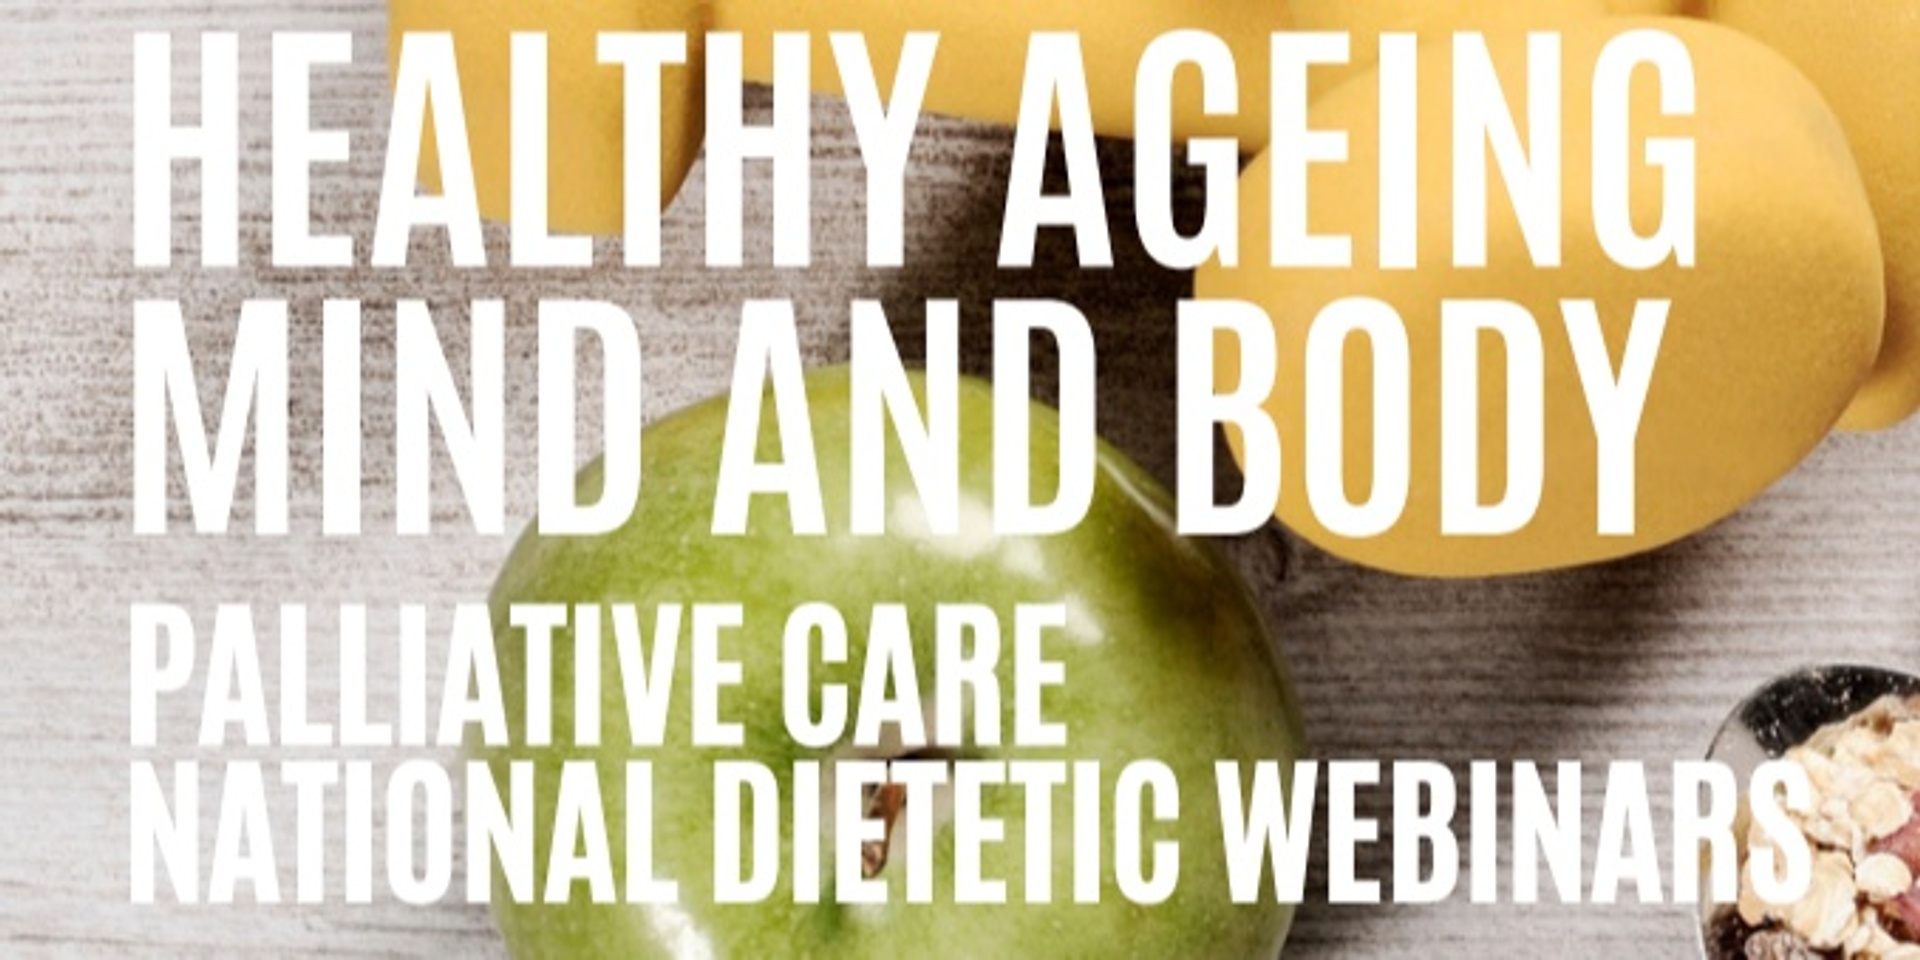 National Dietetic Webinar - Topic 1. Healthy Ageing – Mind and Body